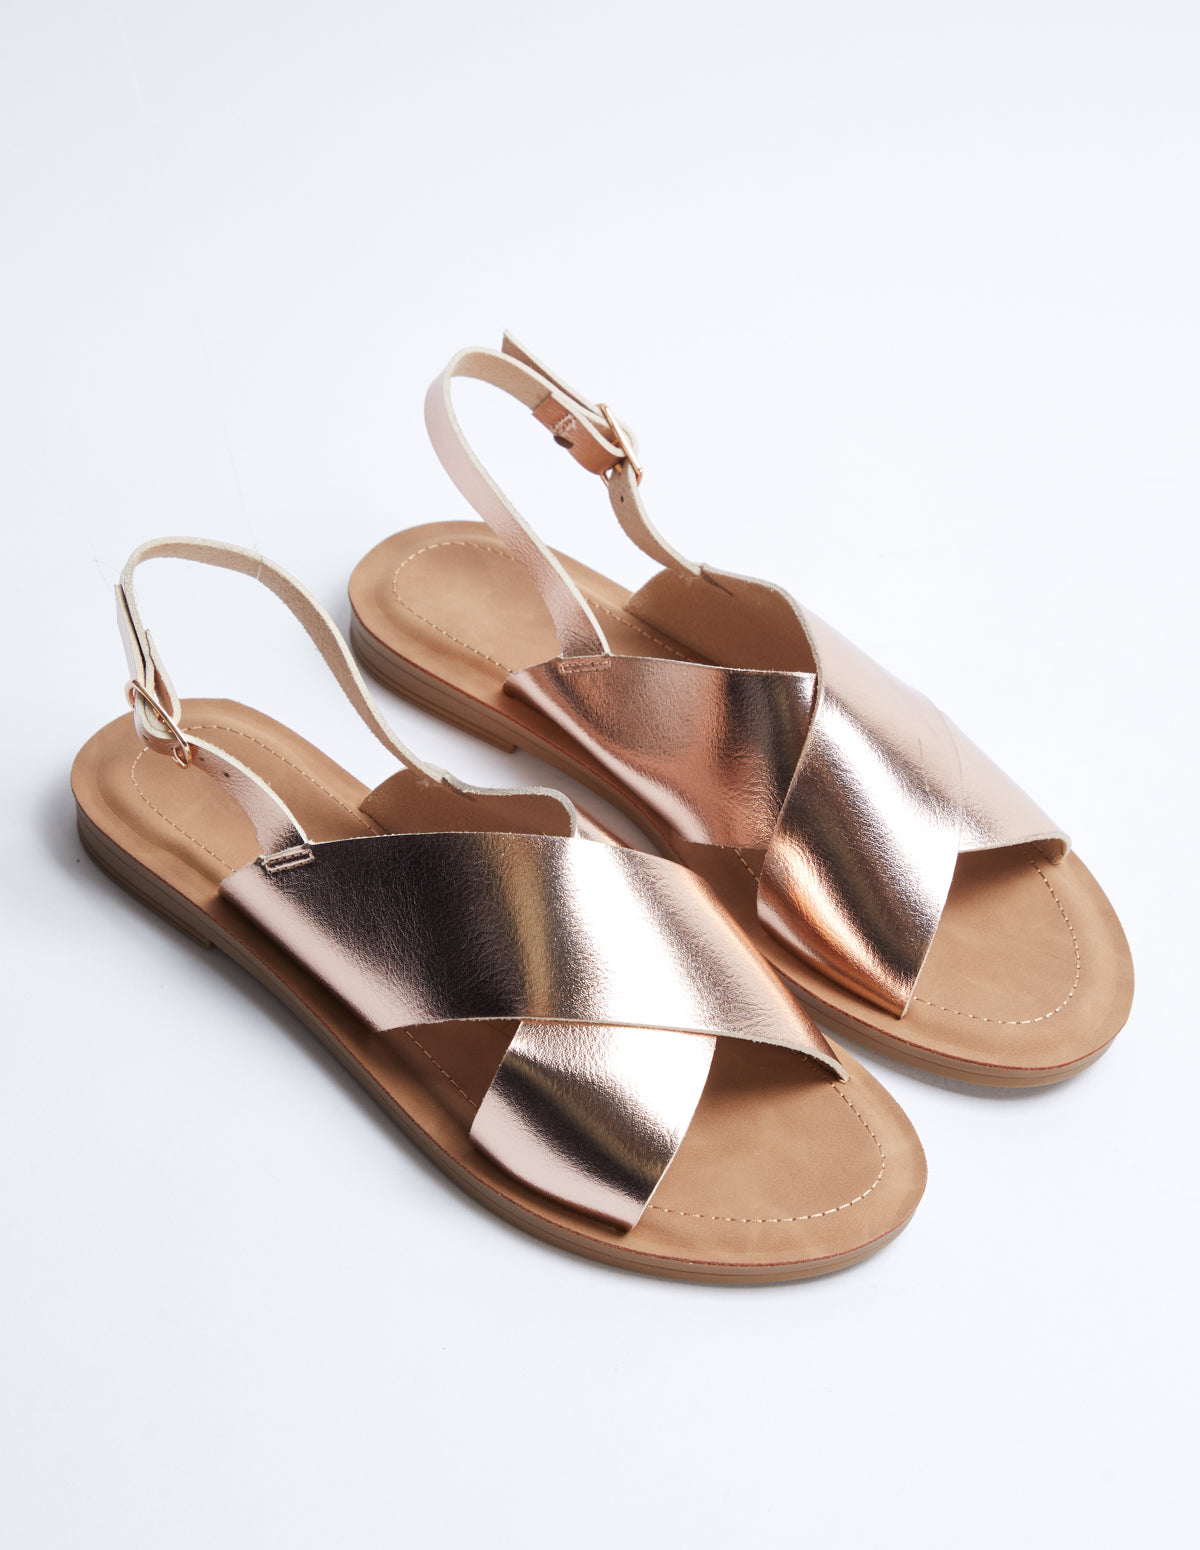 Crossover Strap Sandals - 7